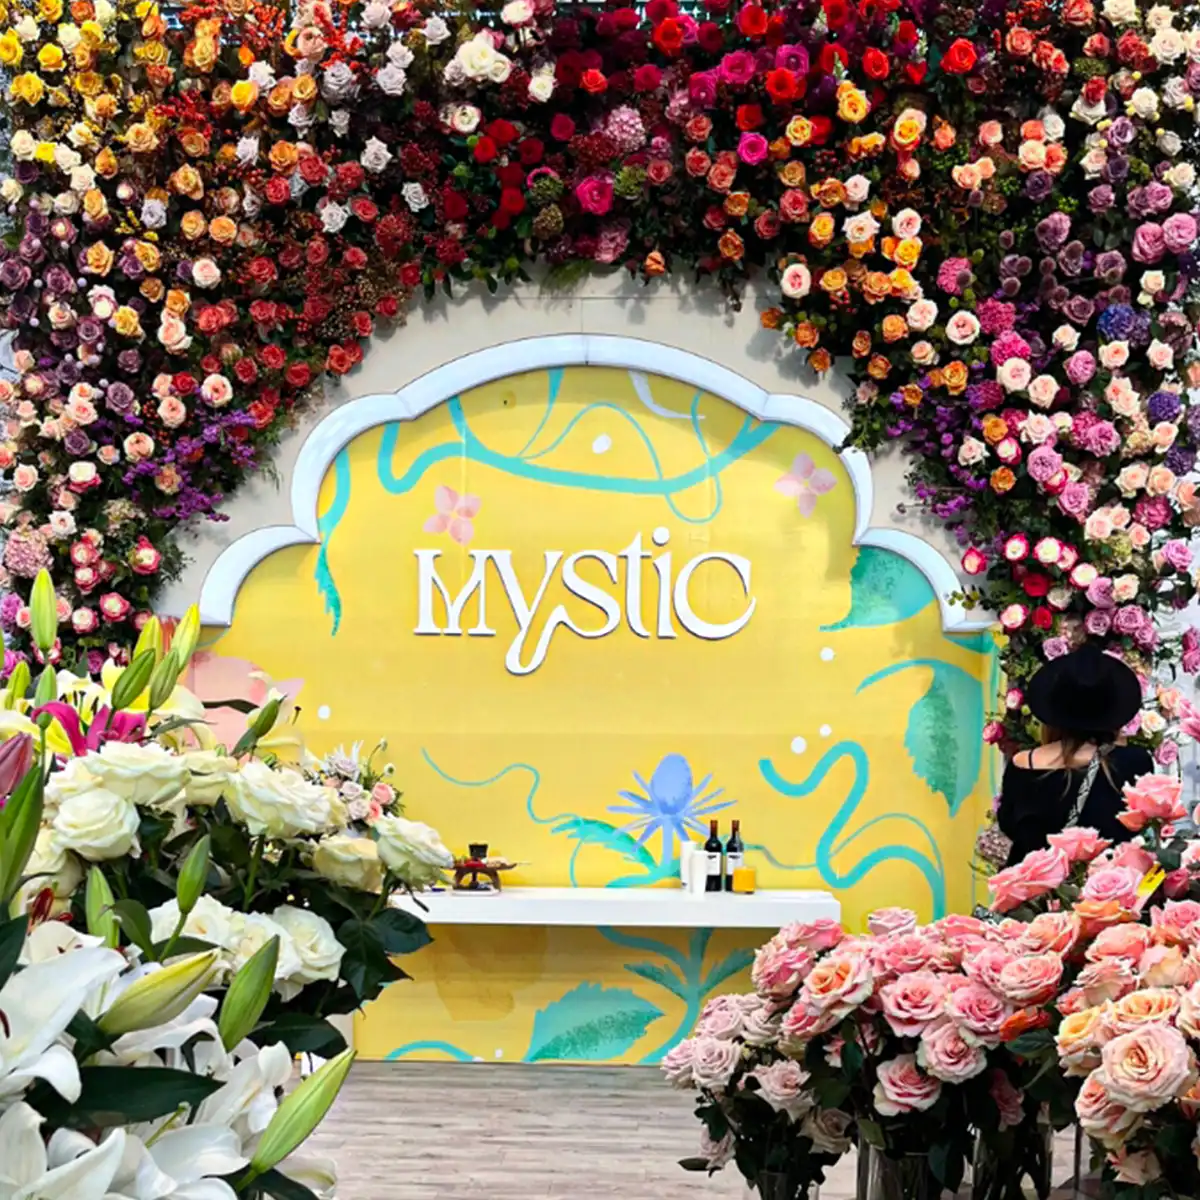 Mystic Flowers IFTF booth on Thursd